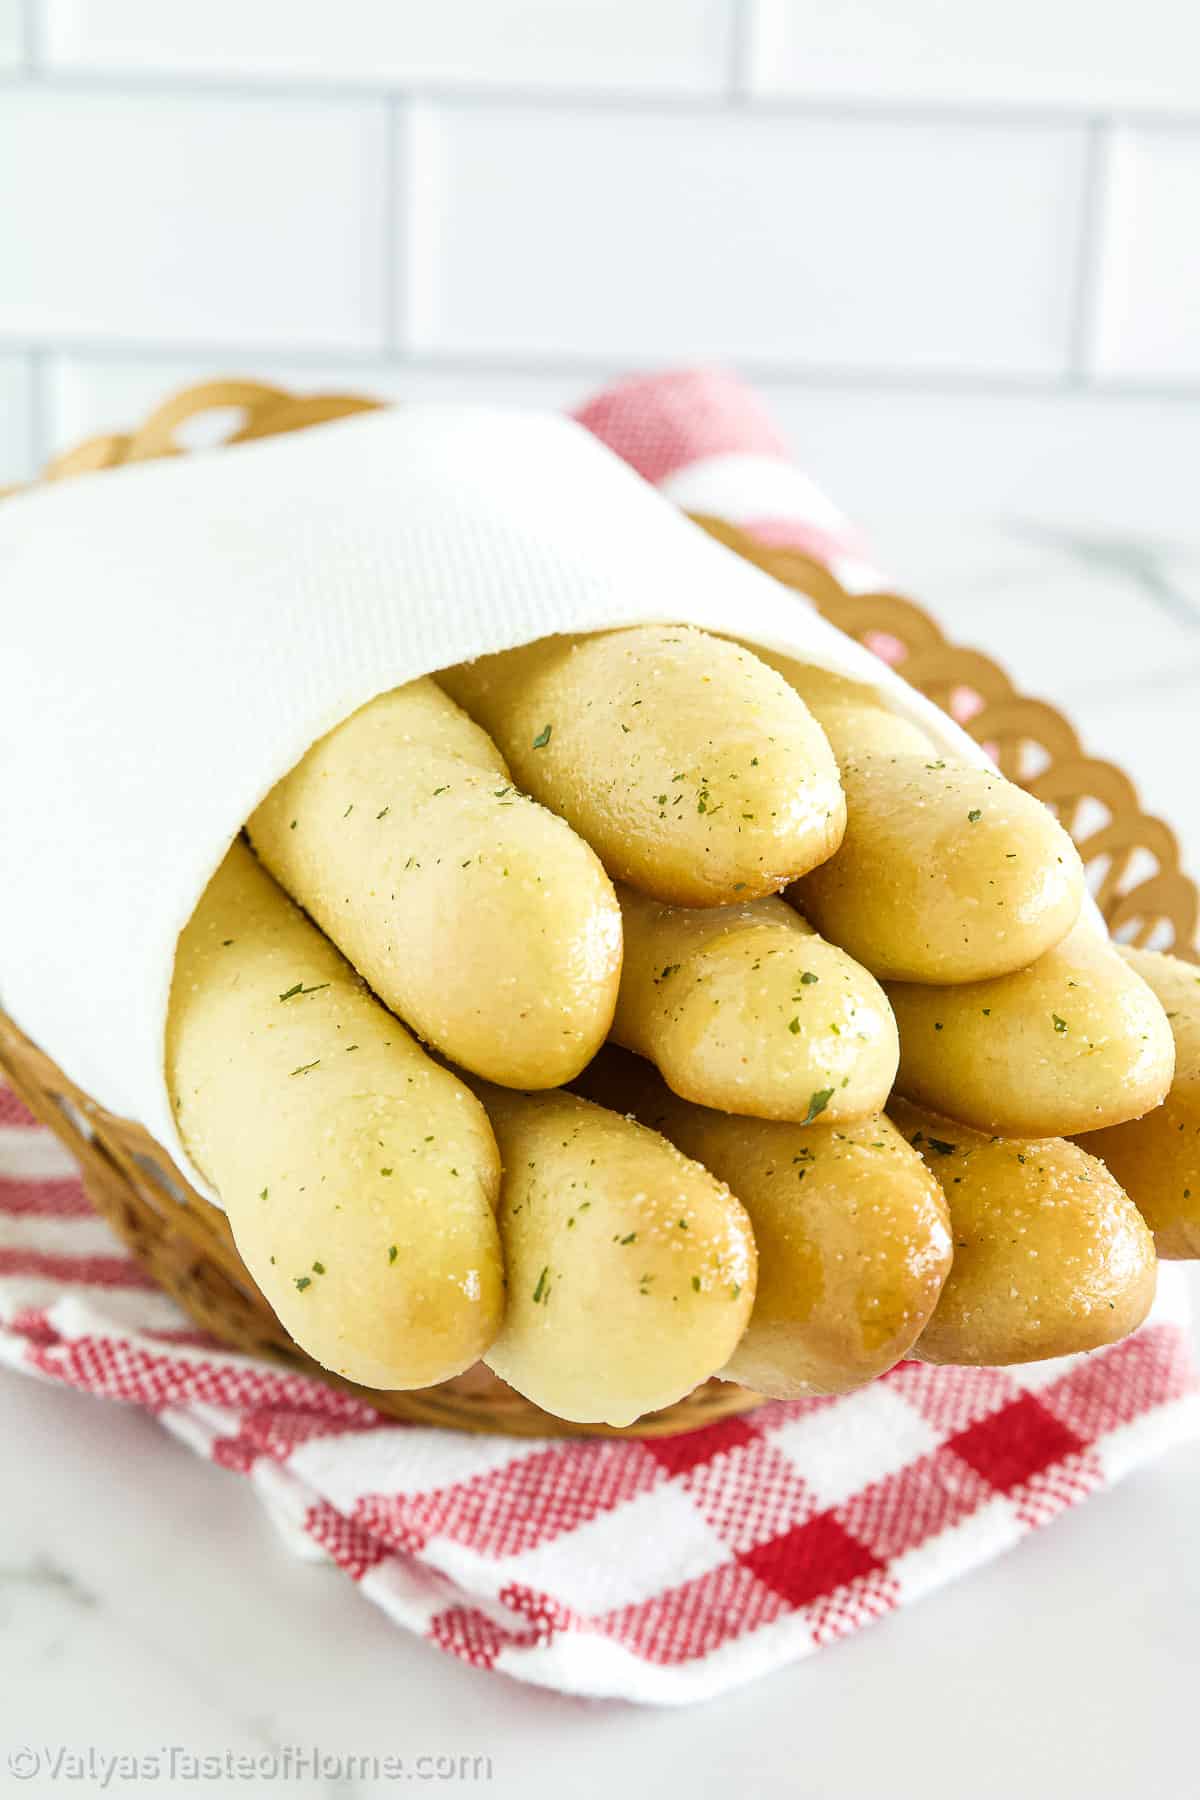 If you're looking to make delicious breadsticks but don't know where to start, this recipe will give you perfect breadsticks every time! Quick and easy to make!